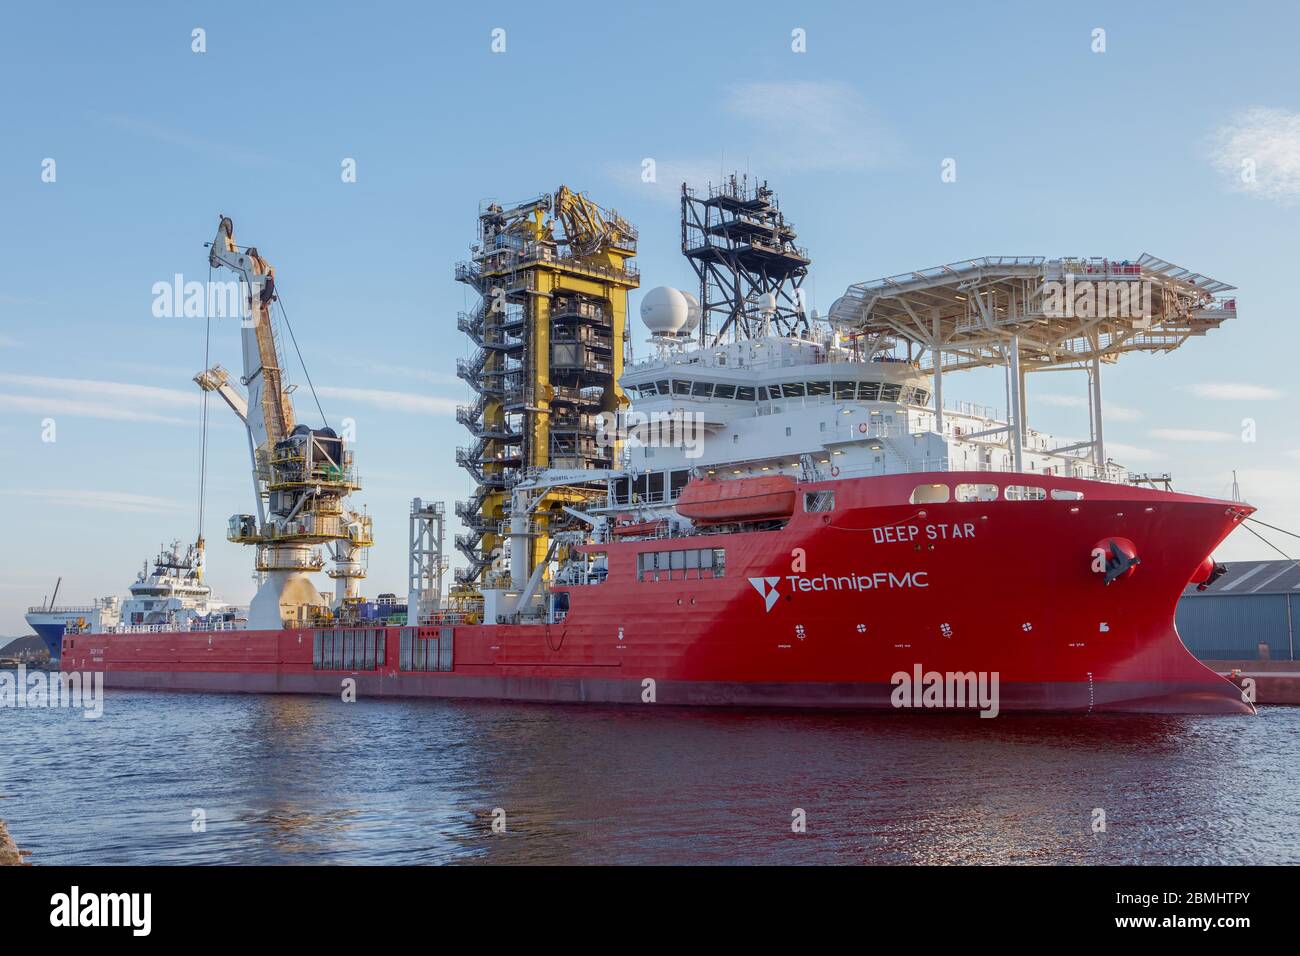 Deep Star, a sub-sea pipeline laying vessel for the oil and gas industry, in the Port of Leith, Edinburgh Stock Photo